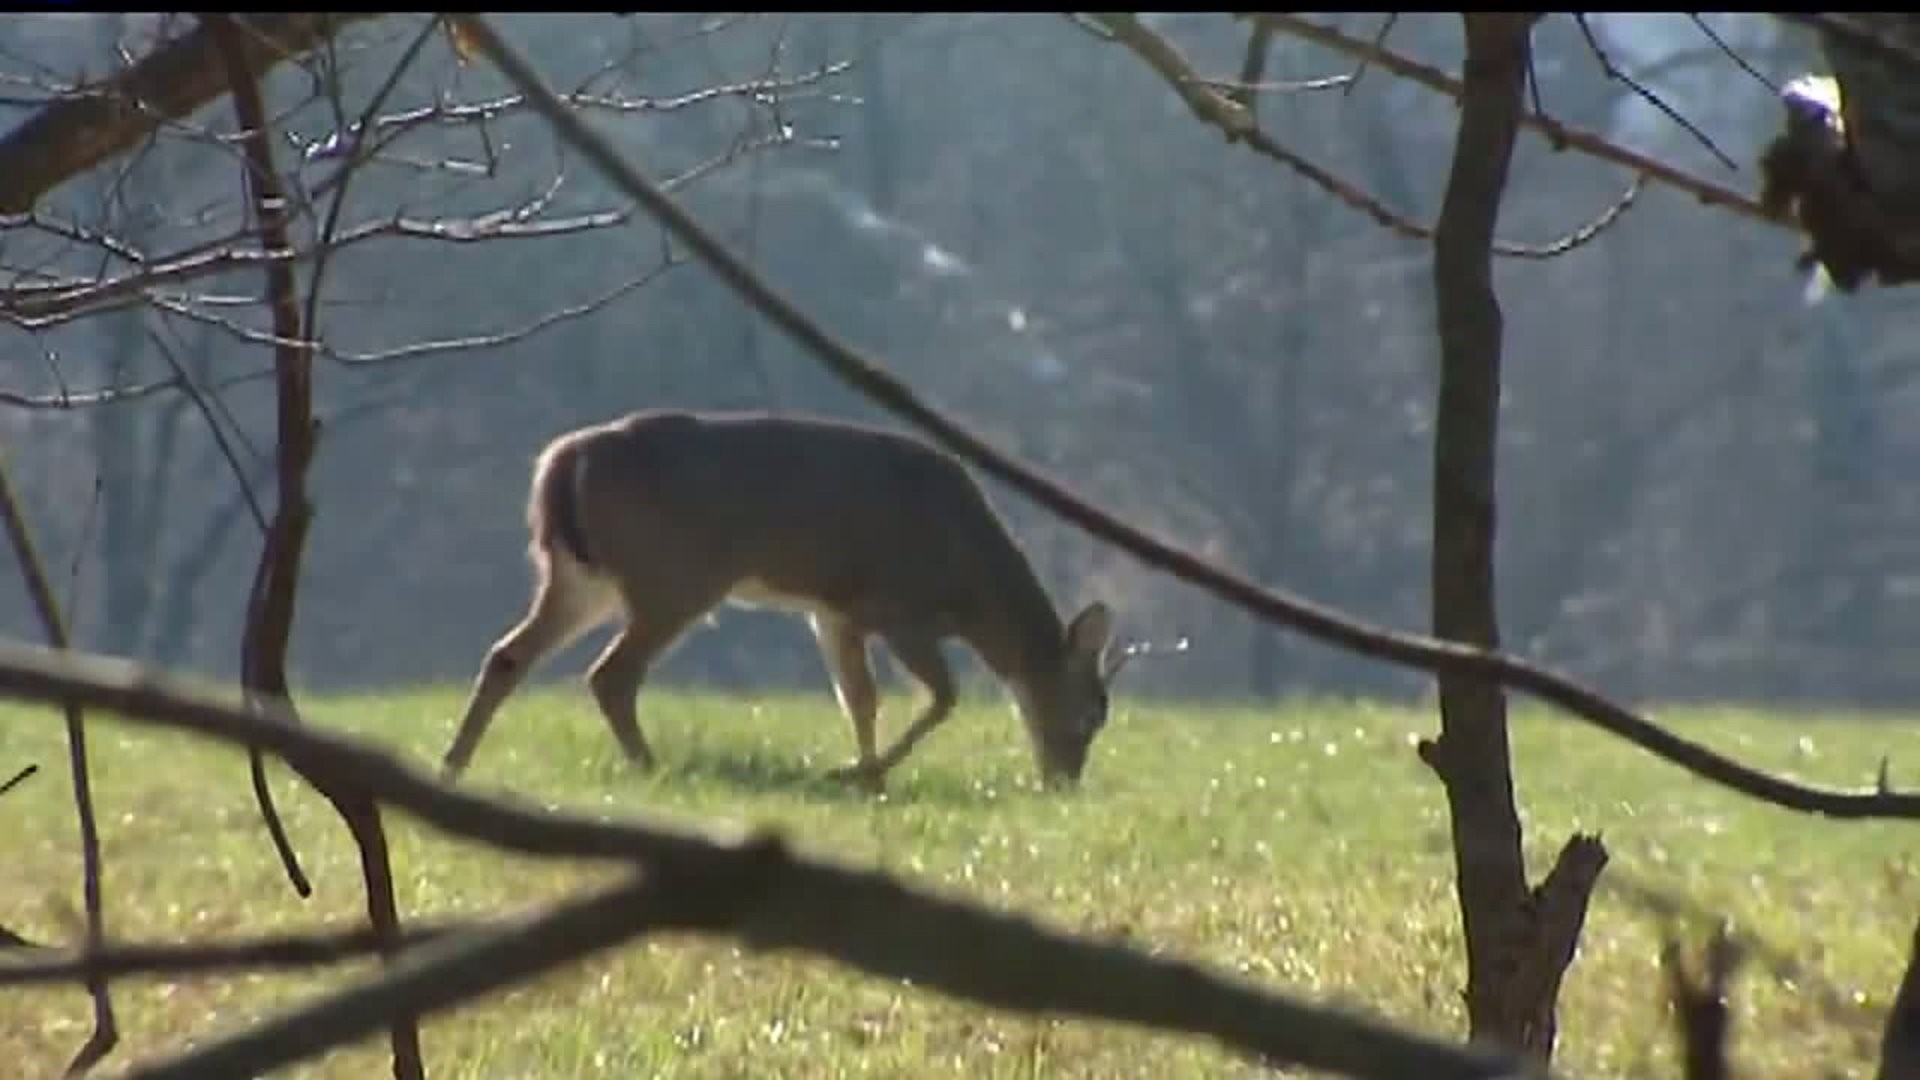 According to the Pennsylvania Department of Transportation, there were more than 5,700 deer-related crashes in 2021, up from almost 5,600 in 2020.